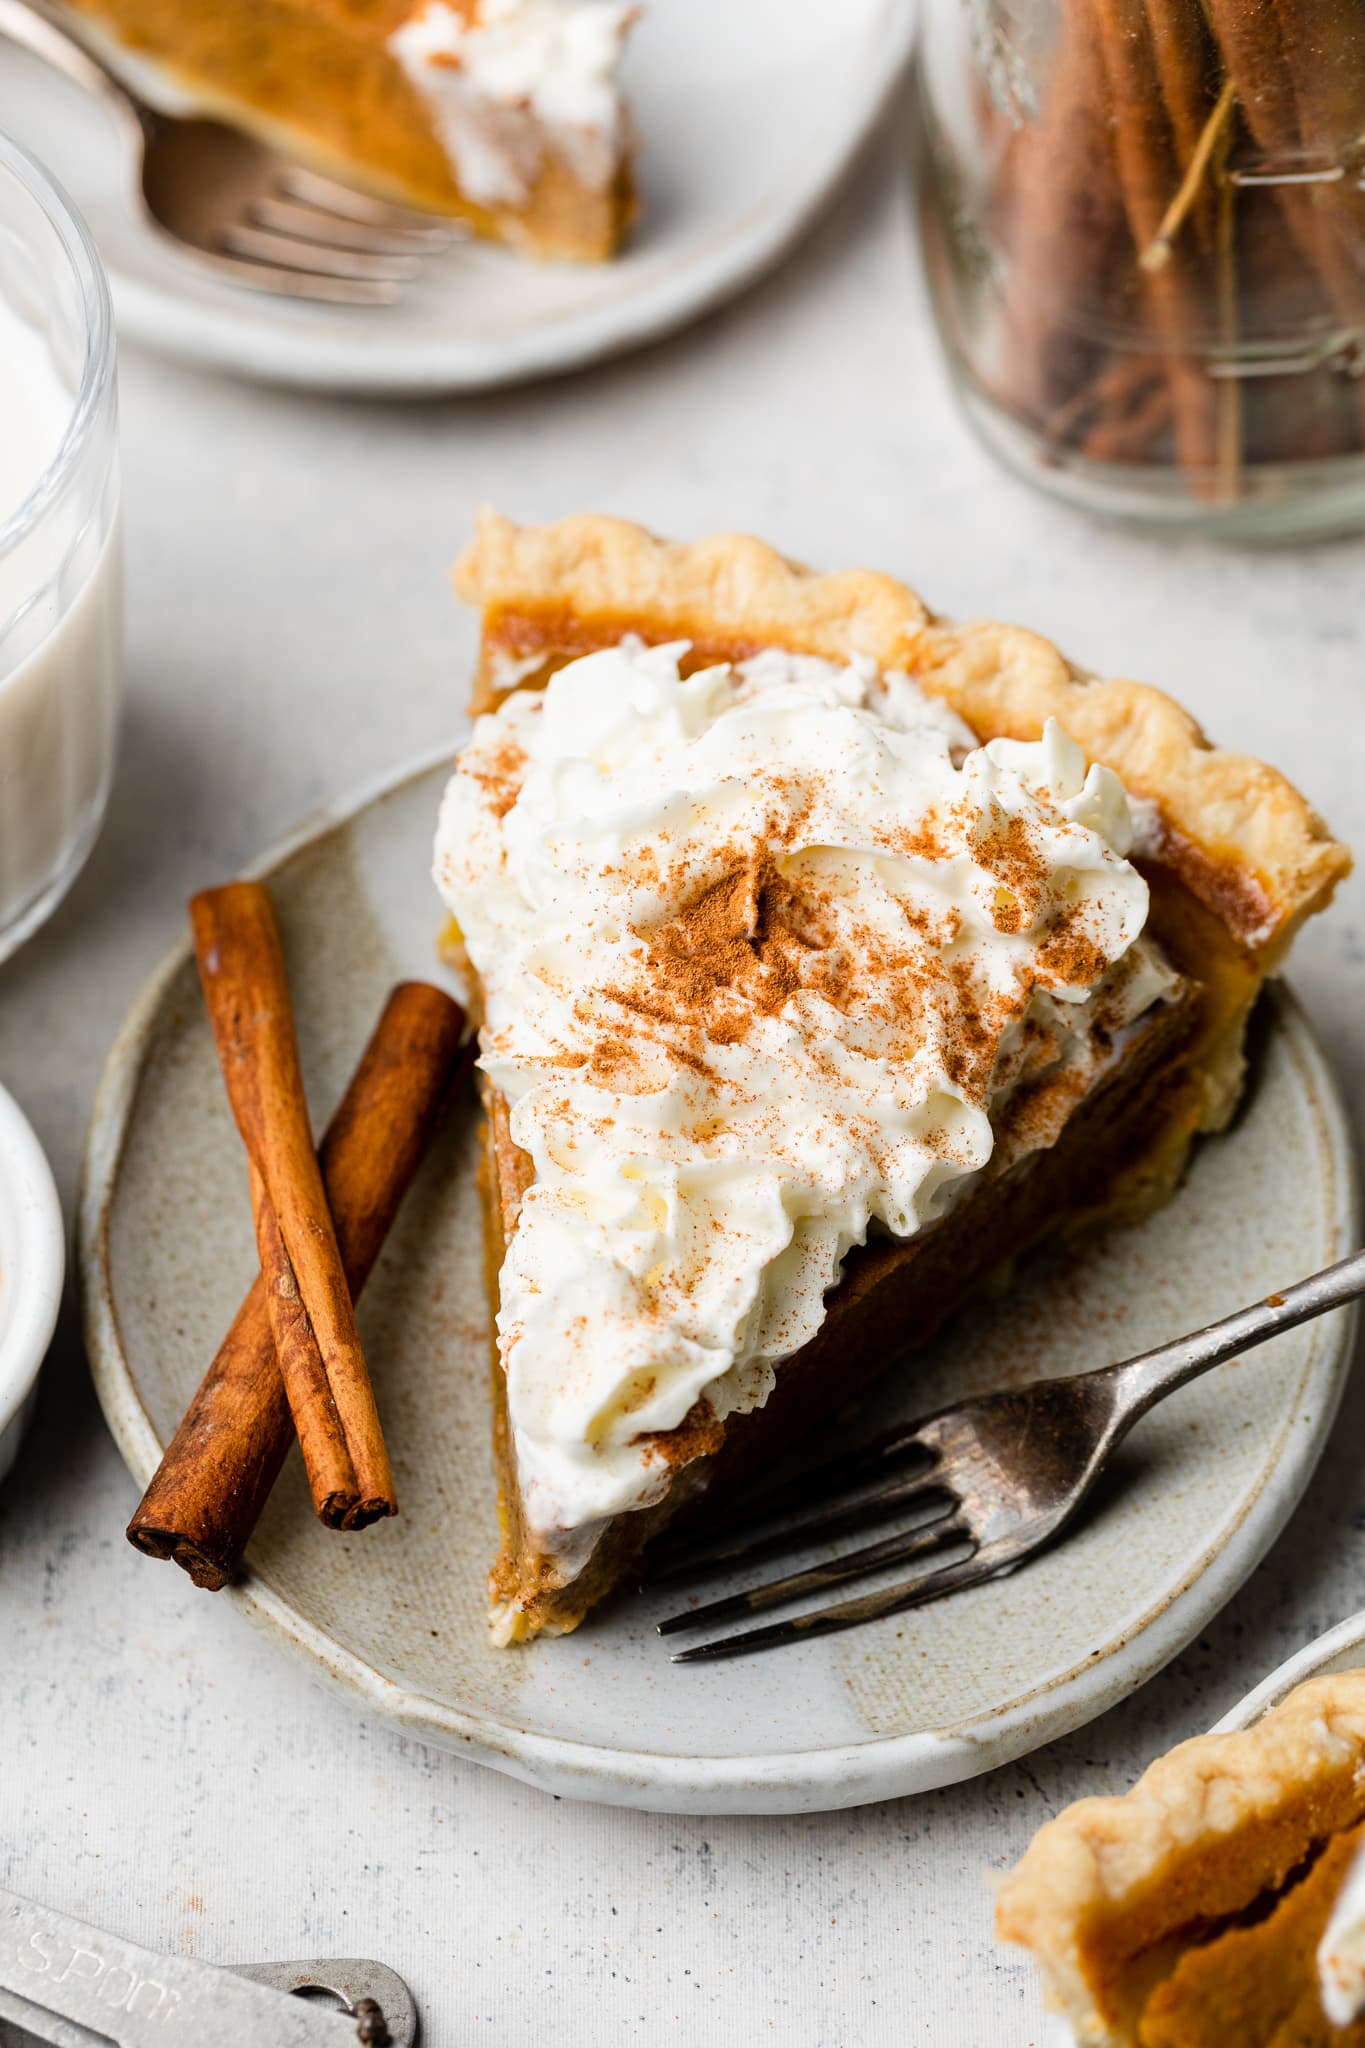 The Best Healthy Pumpkin Pie - All the Healthy Things